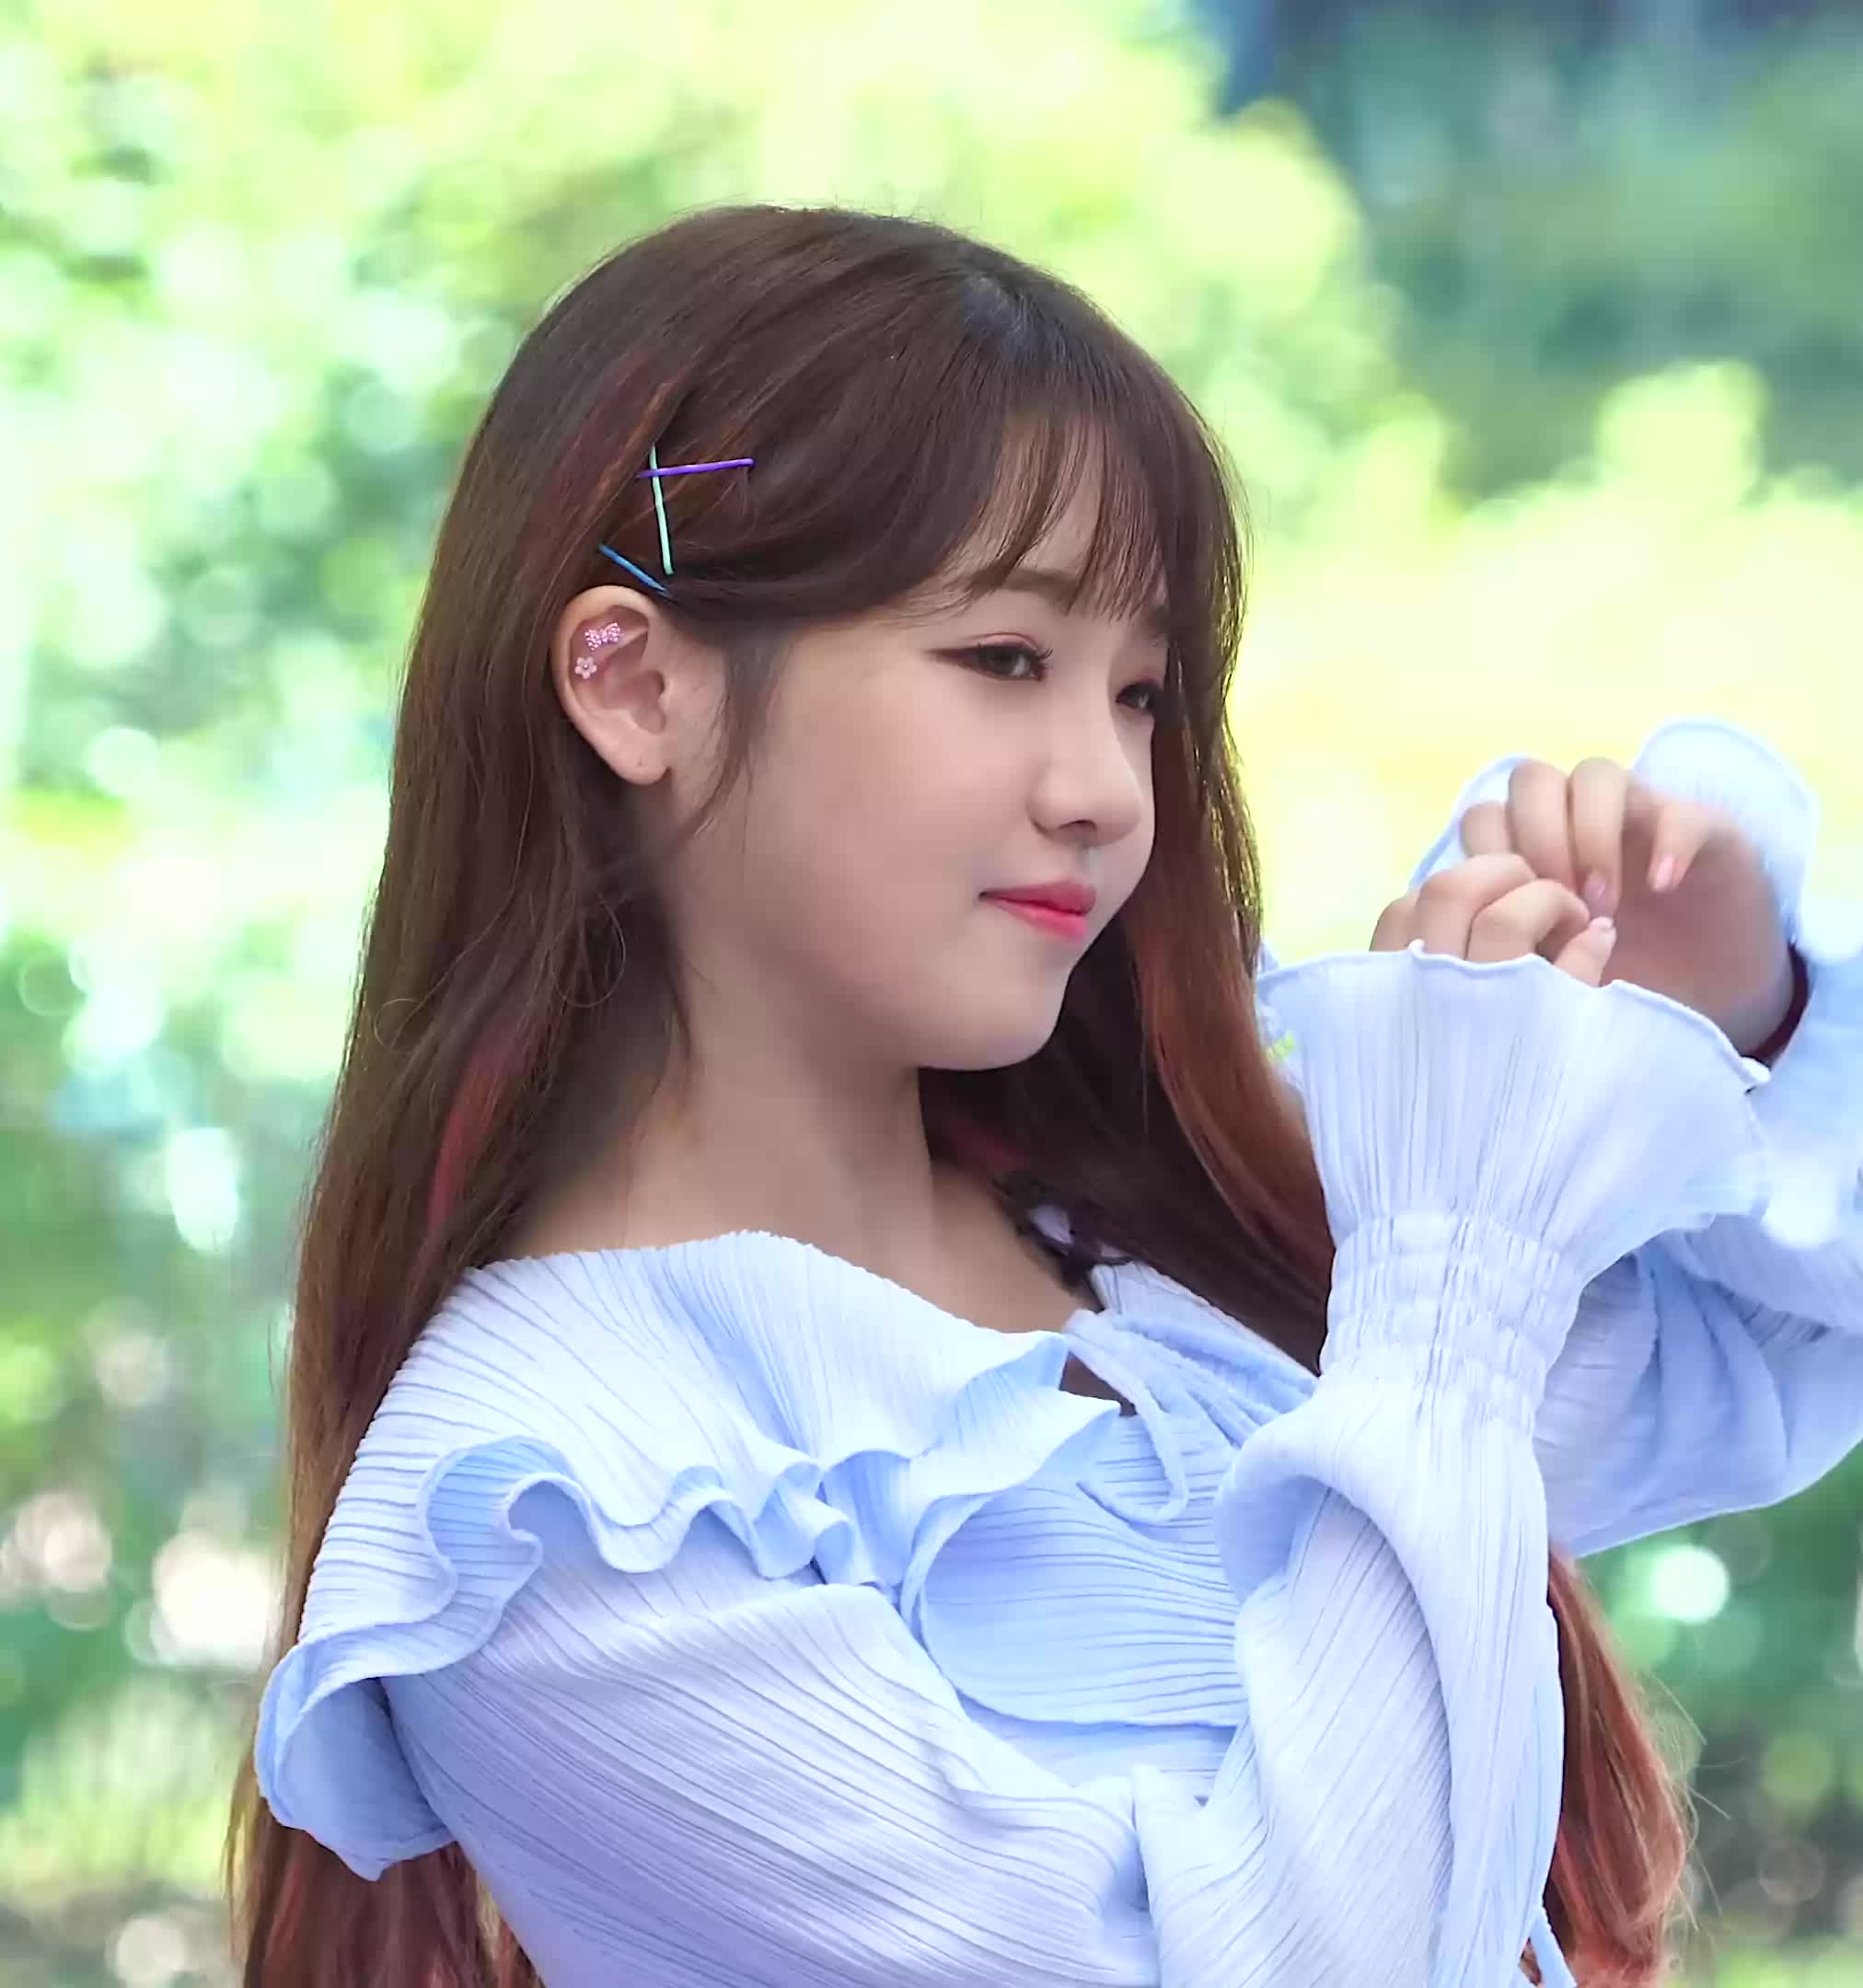 Best Fromis 9 GIFs. Find the top GIF on Gfycat